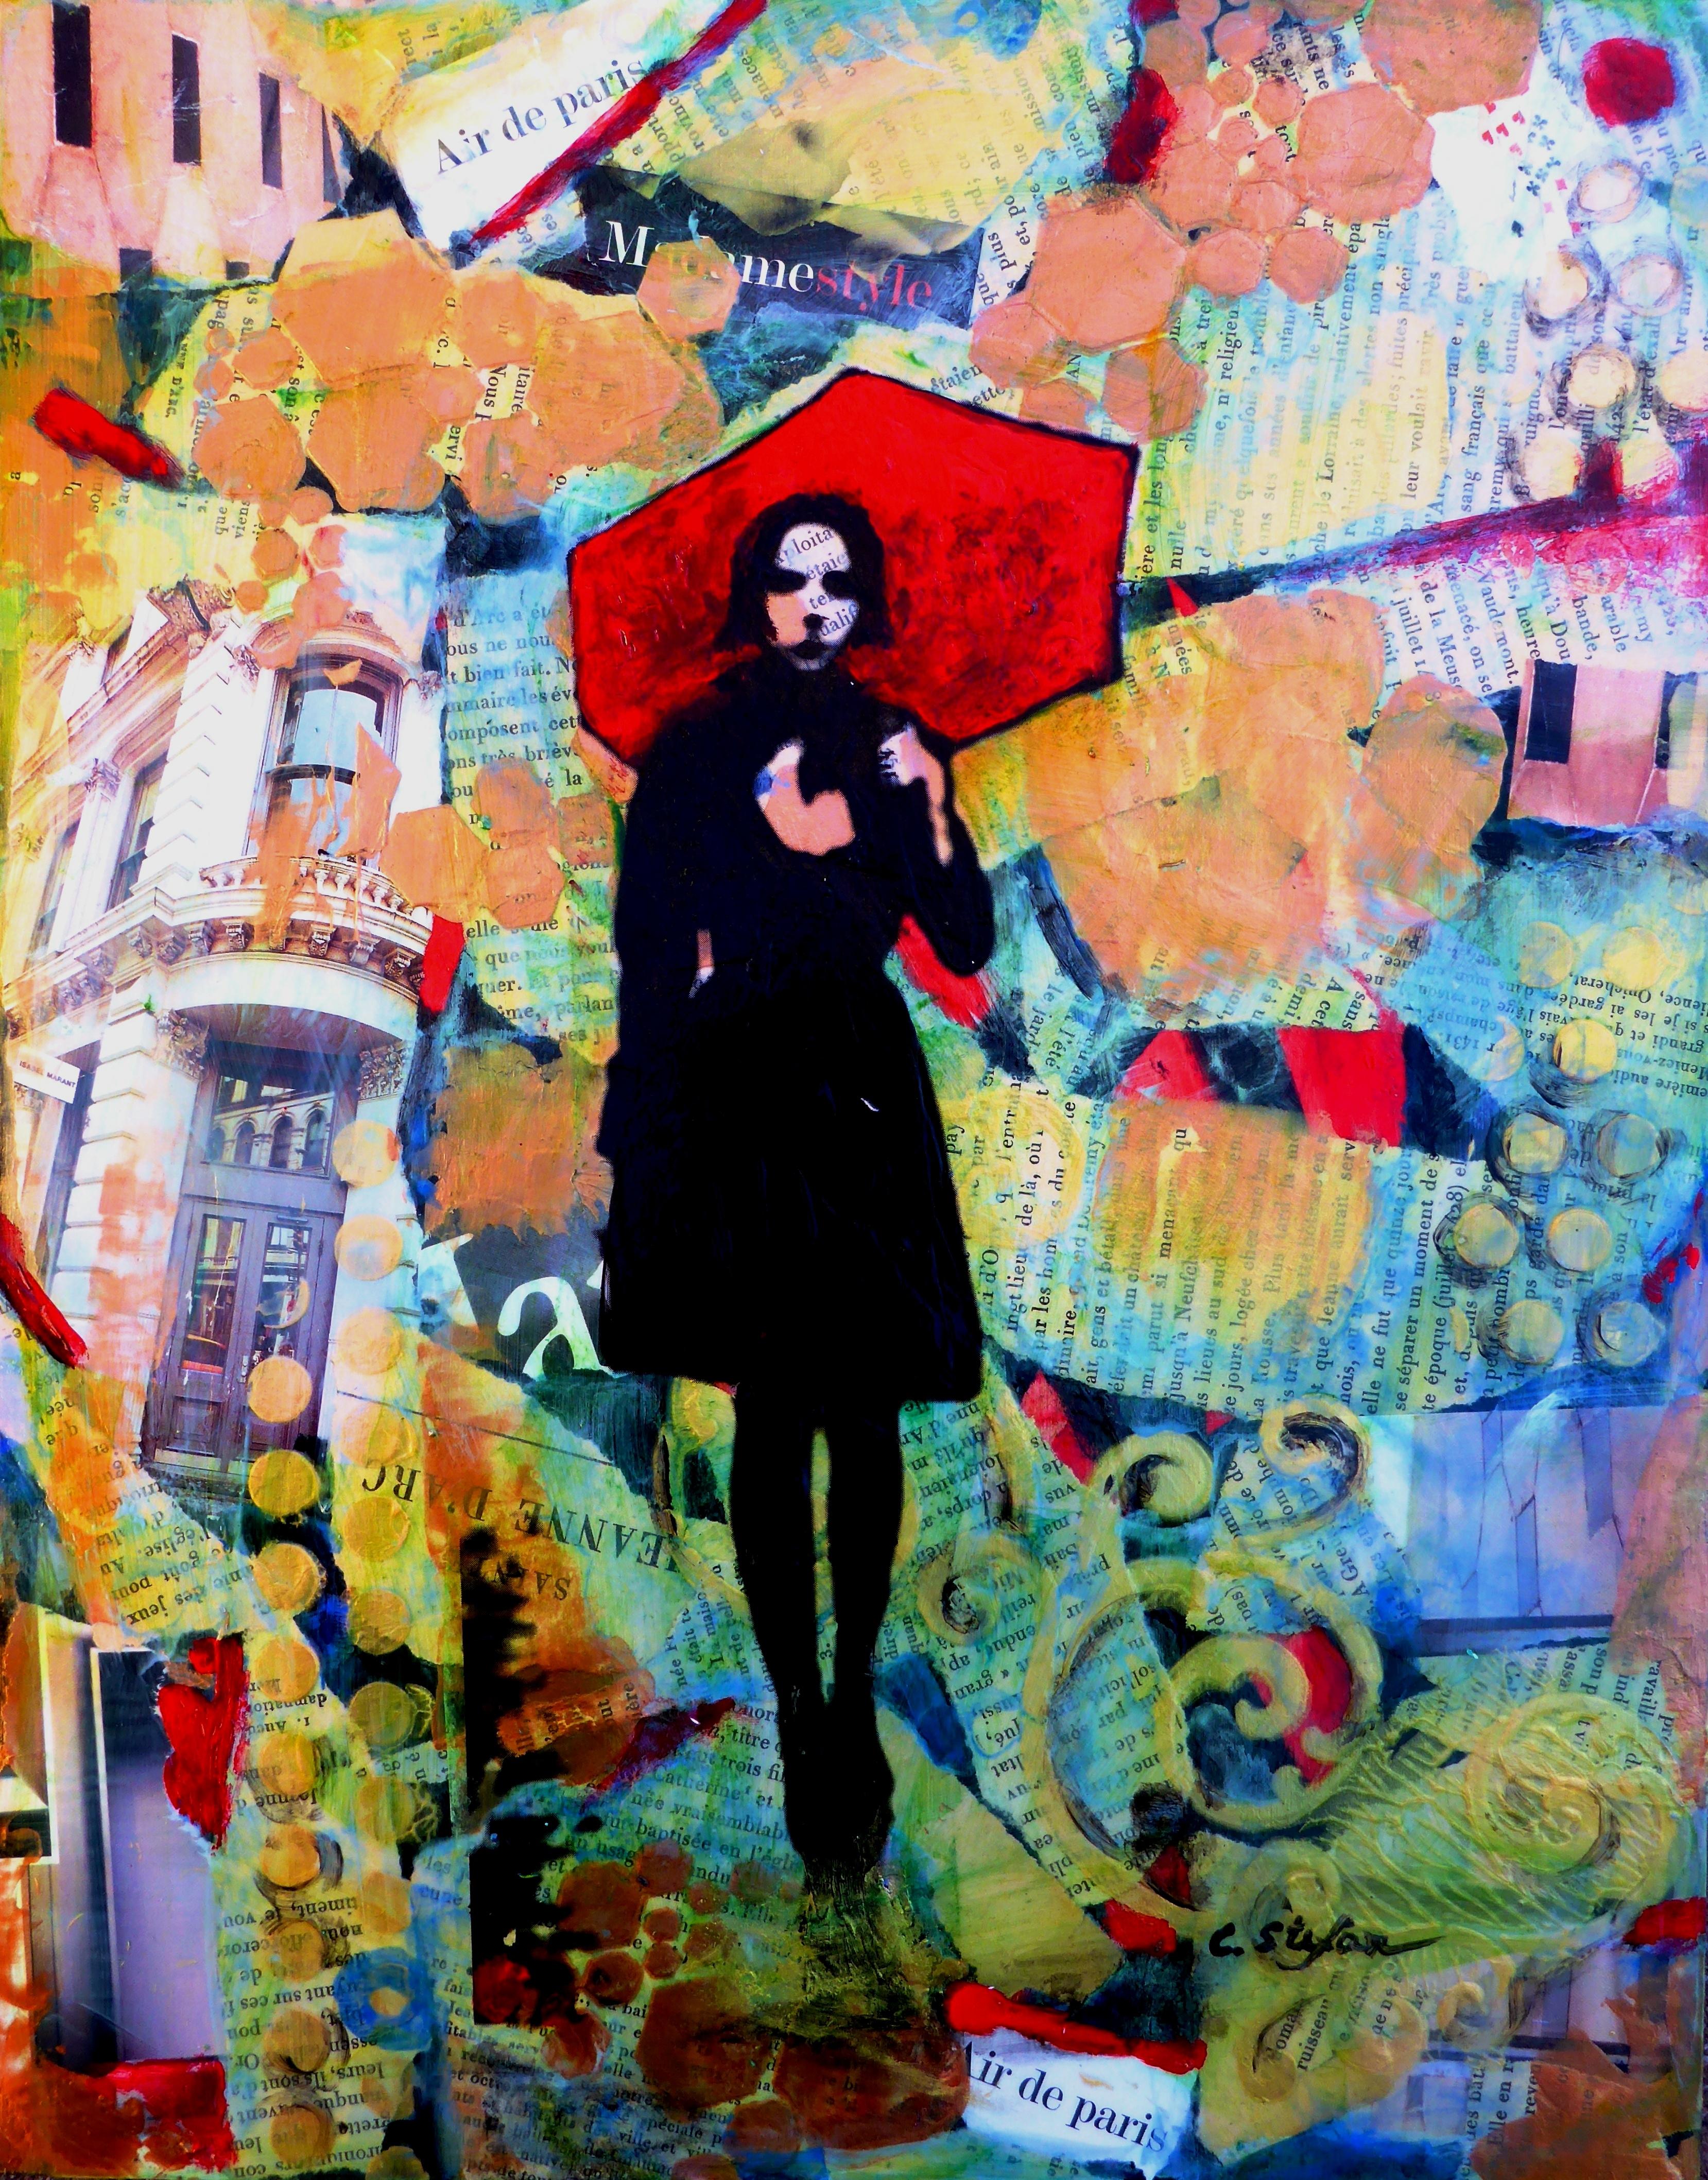 Woman with red umbrella, Mixed Media on Wood Panel - Mixed Media Art by Cristina Stefan